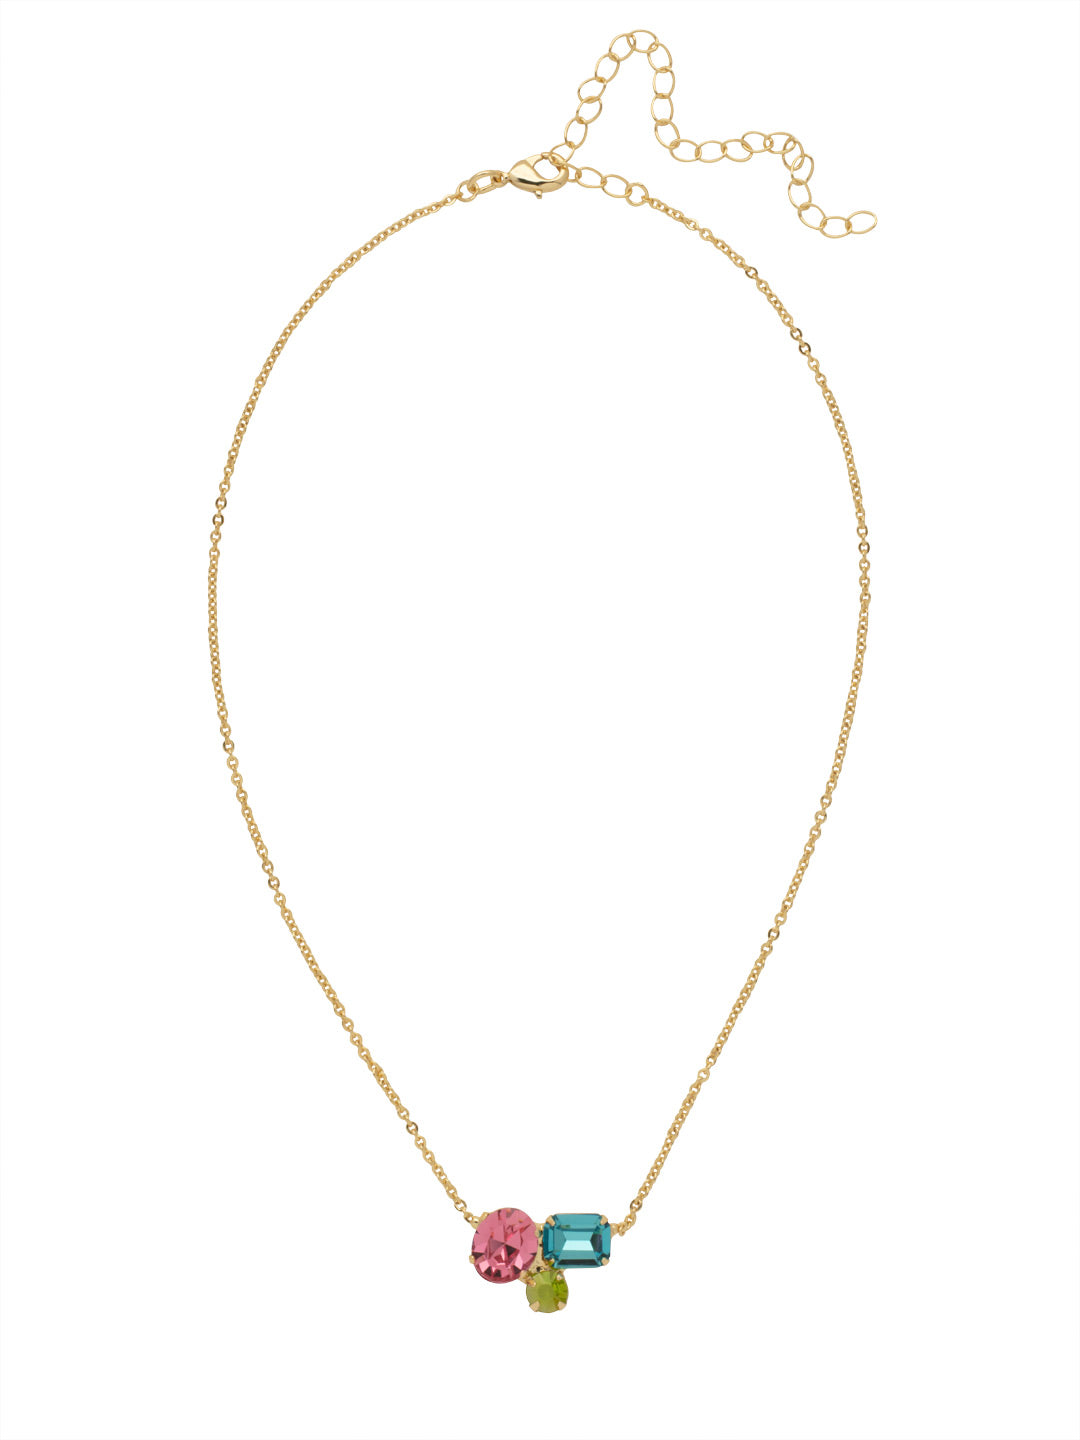 Claudia Pendant Necklace - NFF2BGHBR - <p>The Claudia Pendant Necklace features a cluster of round, oval, and octagon cut crystals on an adjustable chain, secured by a lobster claw clasp. From Sorrelli's Happy Birthday Redux collection in our Bright Gold-tone finish.</p>